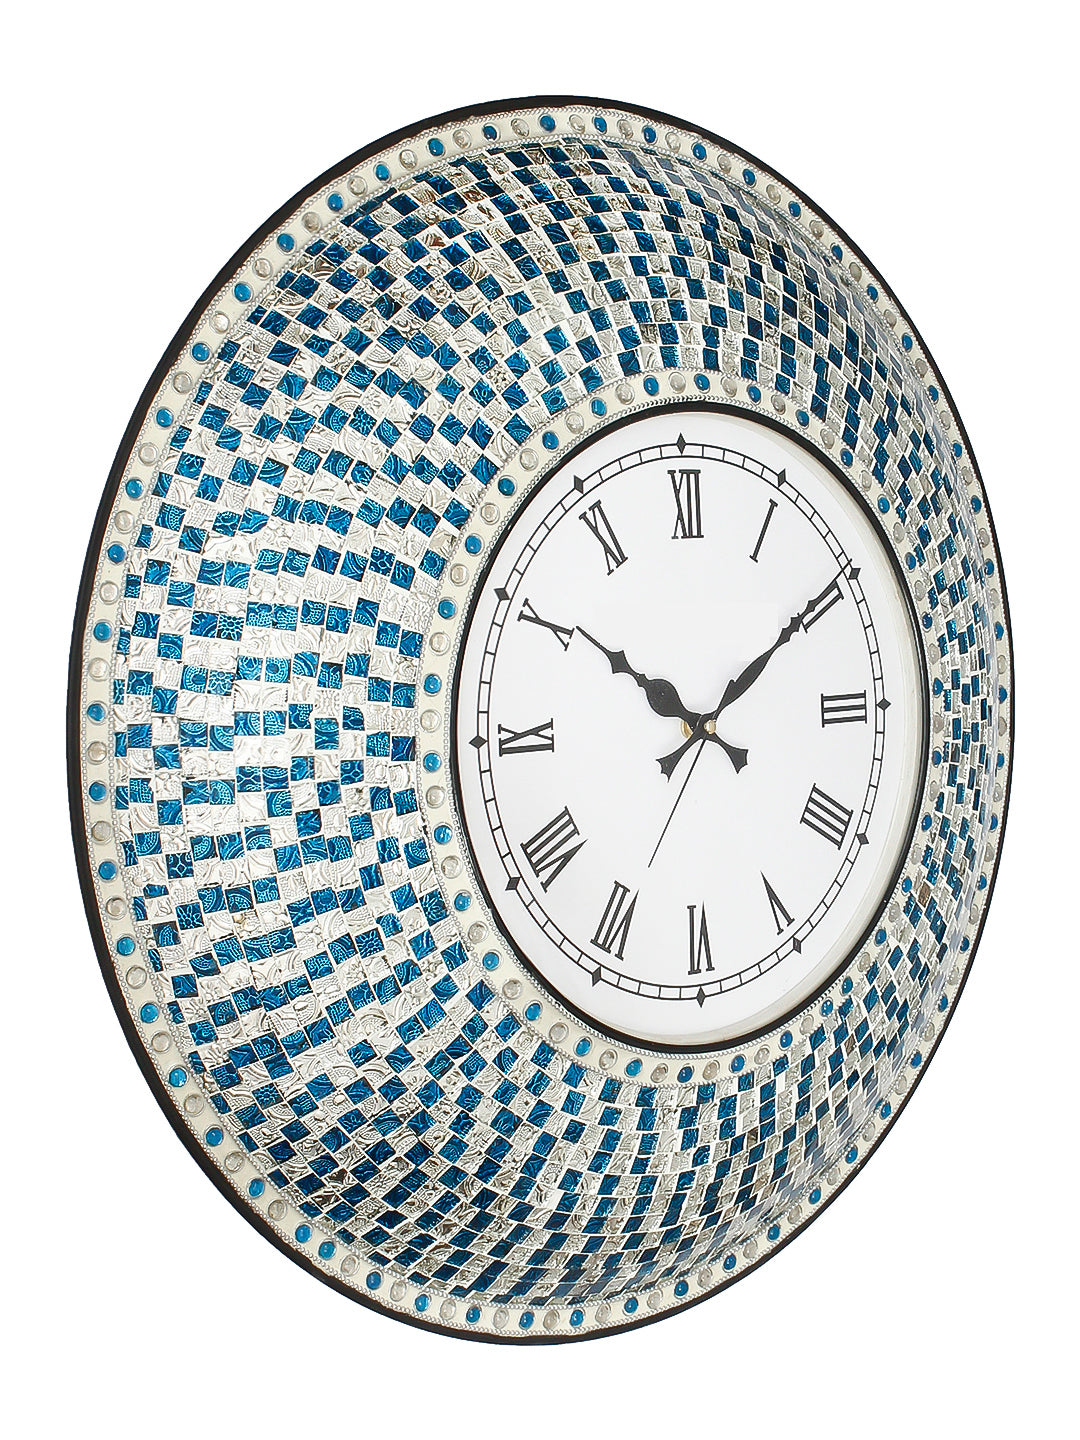 Blue Mosaic Glass & Wood Round Handcrafted Analog Ethnic Luxury Roman Numeral Wall Clock 4